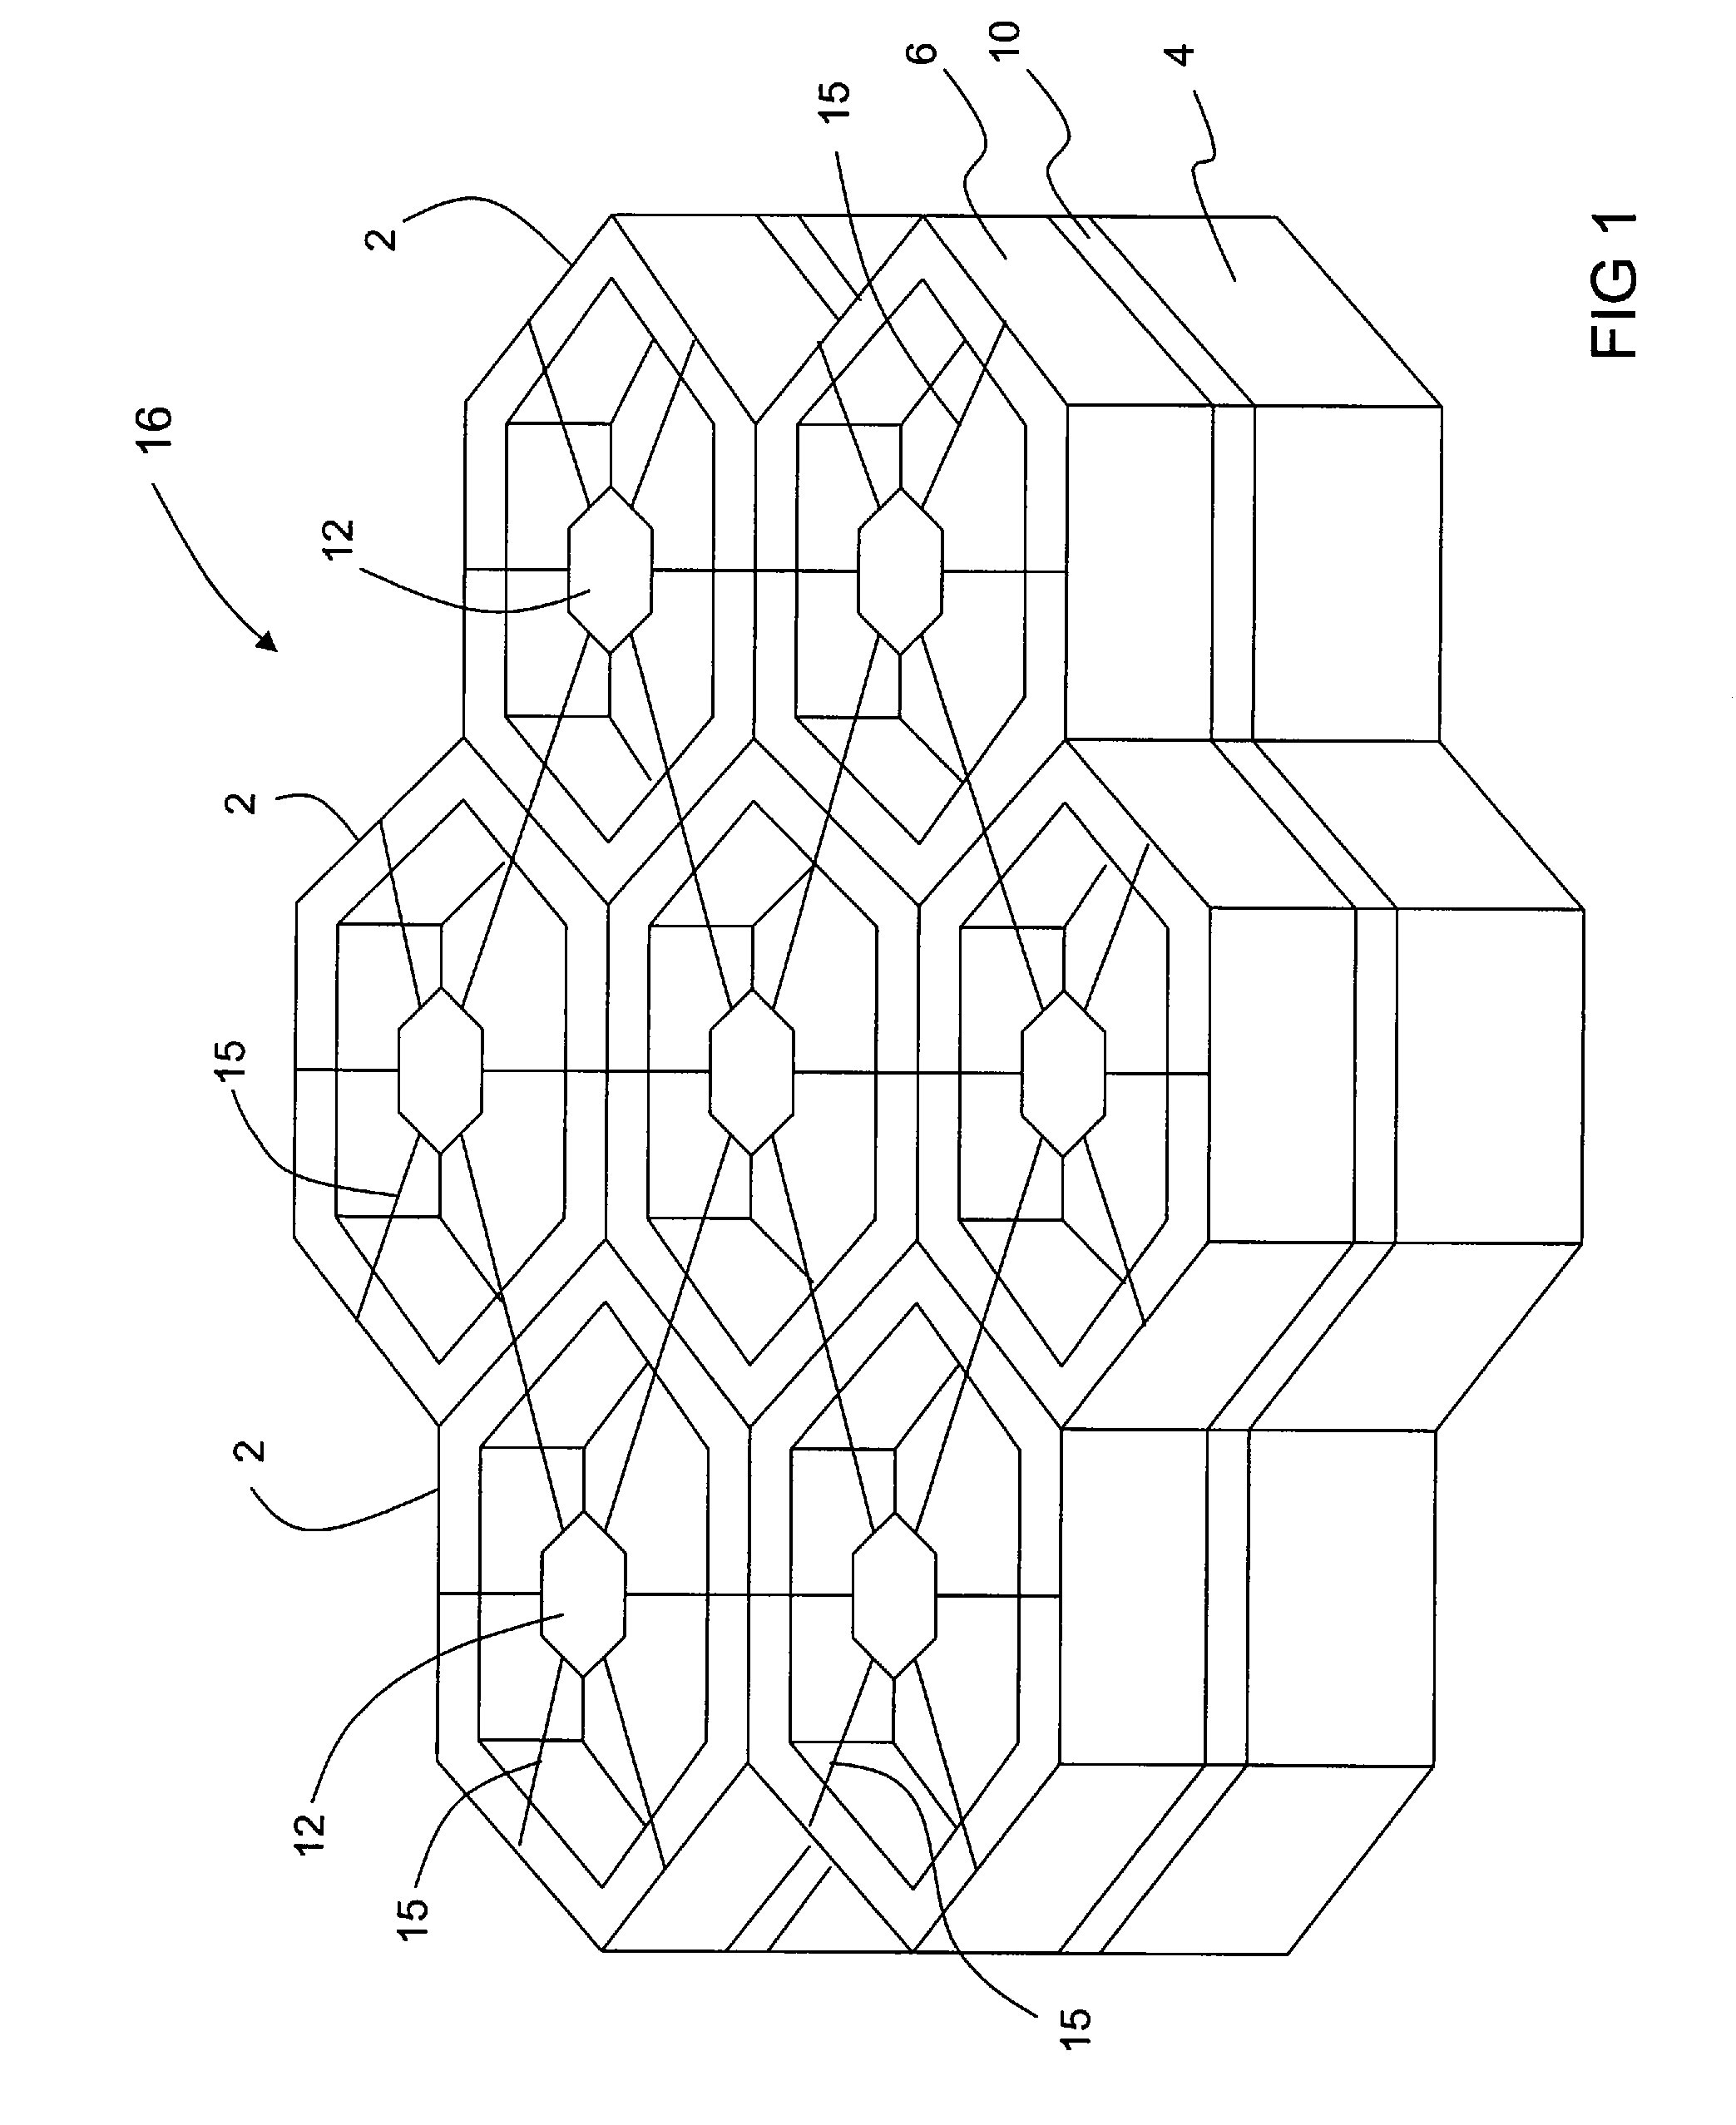 UltraSound System With Highly Integrated ASIC Architecture